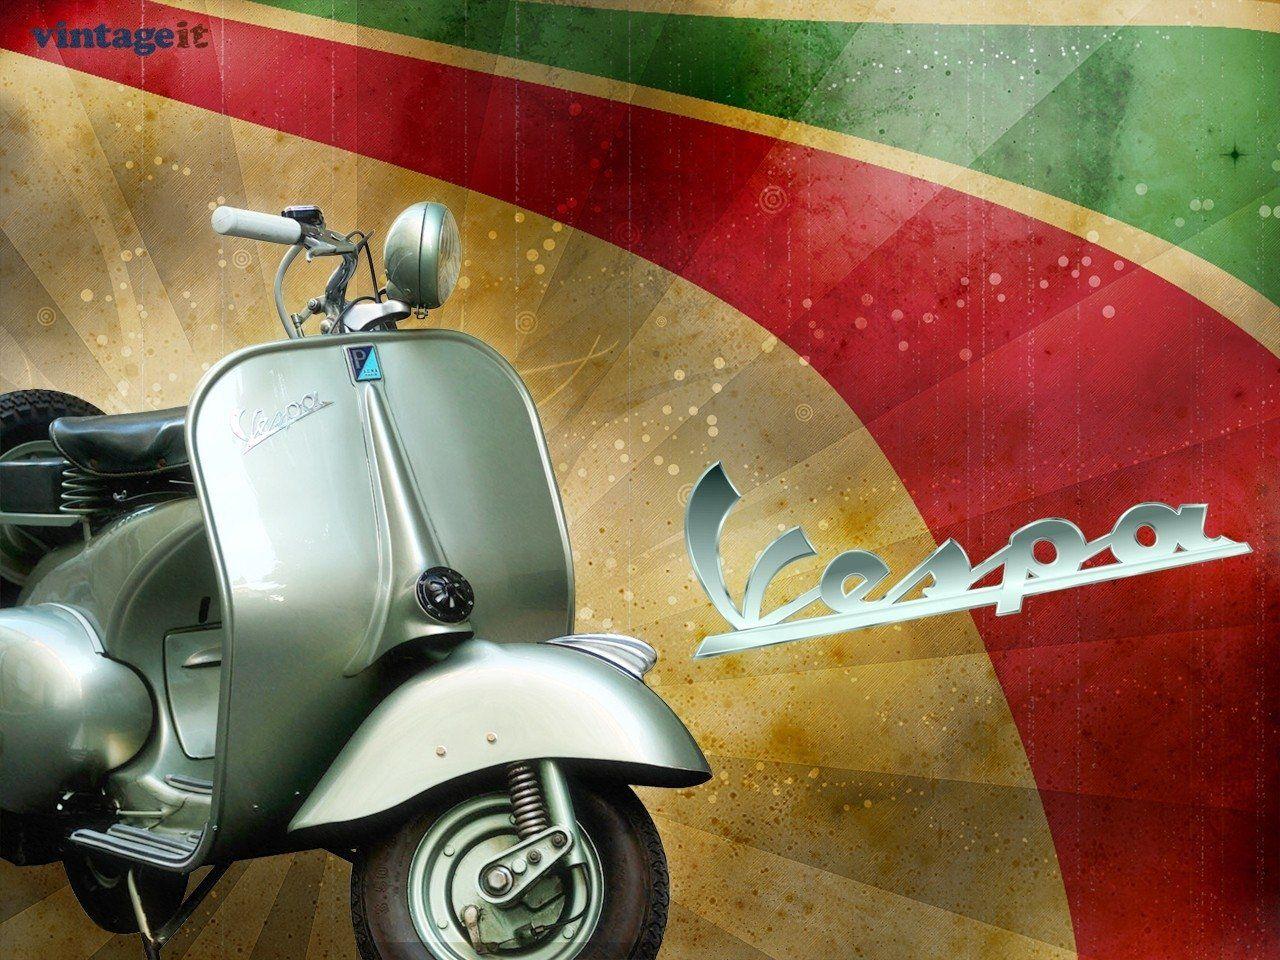 Vespa HD Wallpaper and Background Image